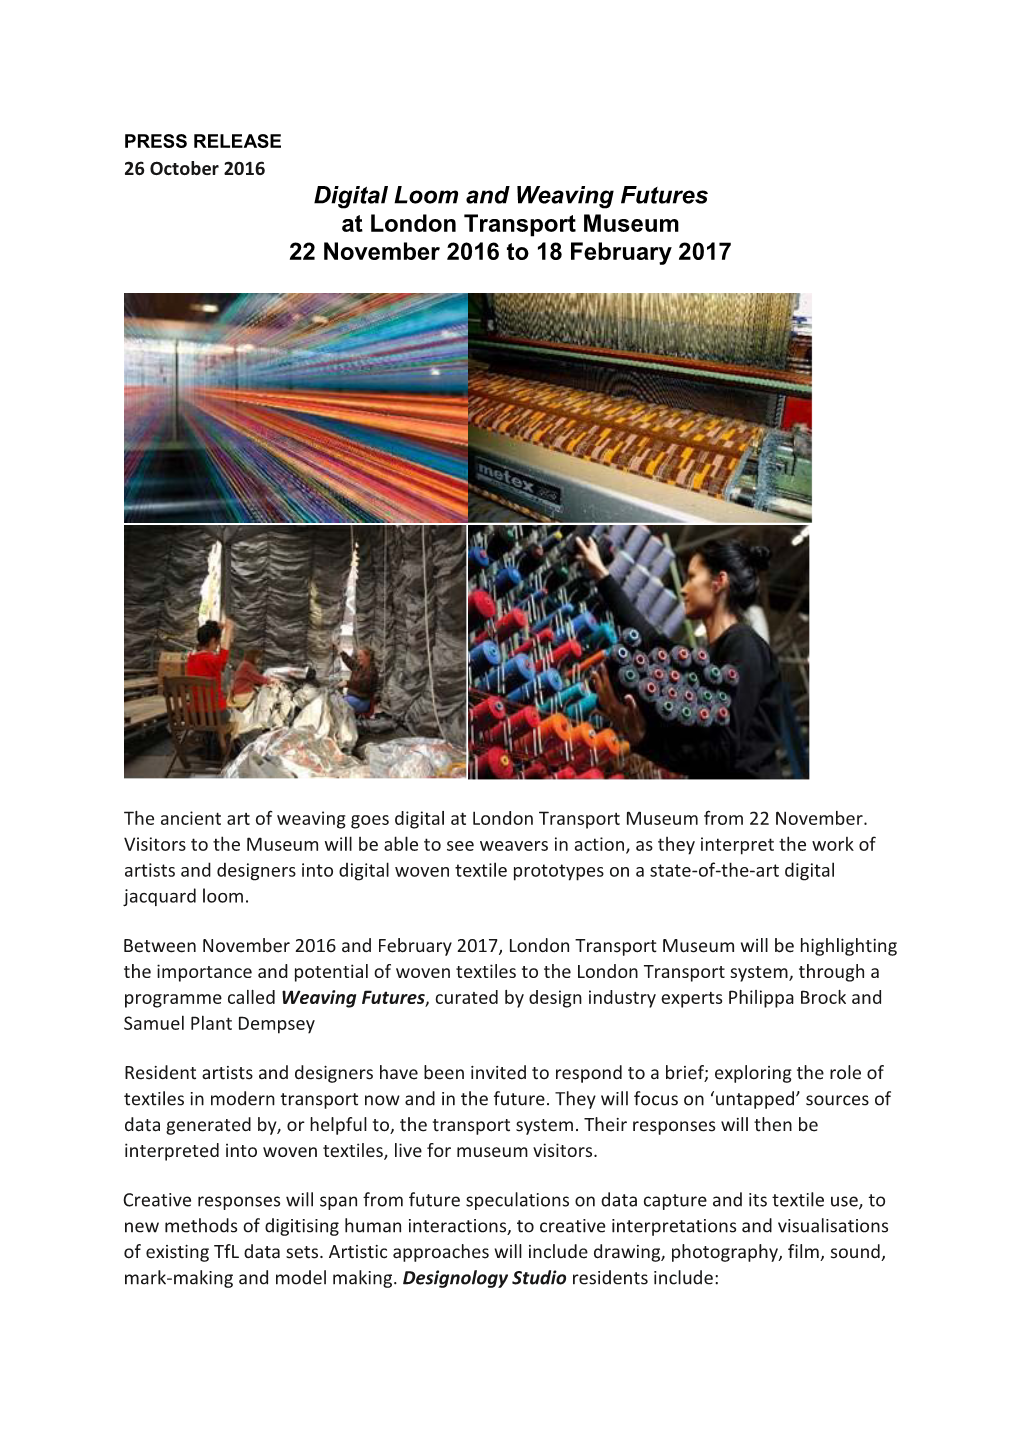 Digital Loom and Weaving Futures at London Transport Museum 22 November 2016 to 18 February 2017